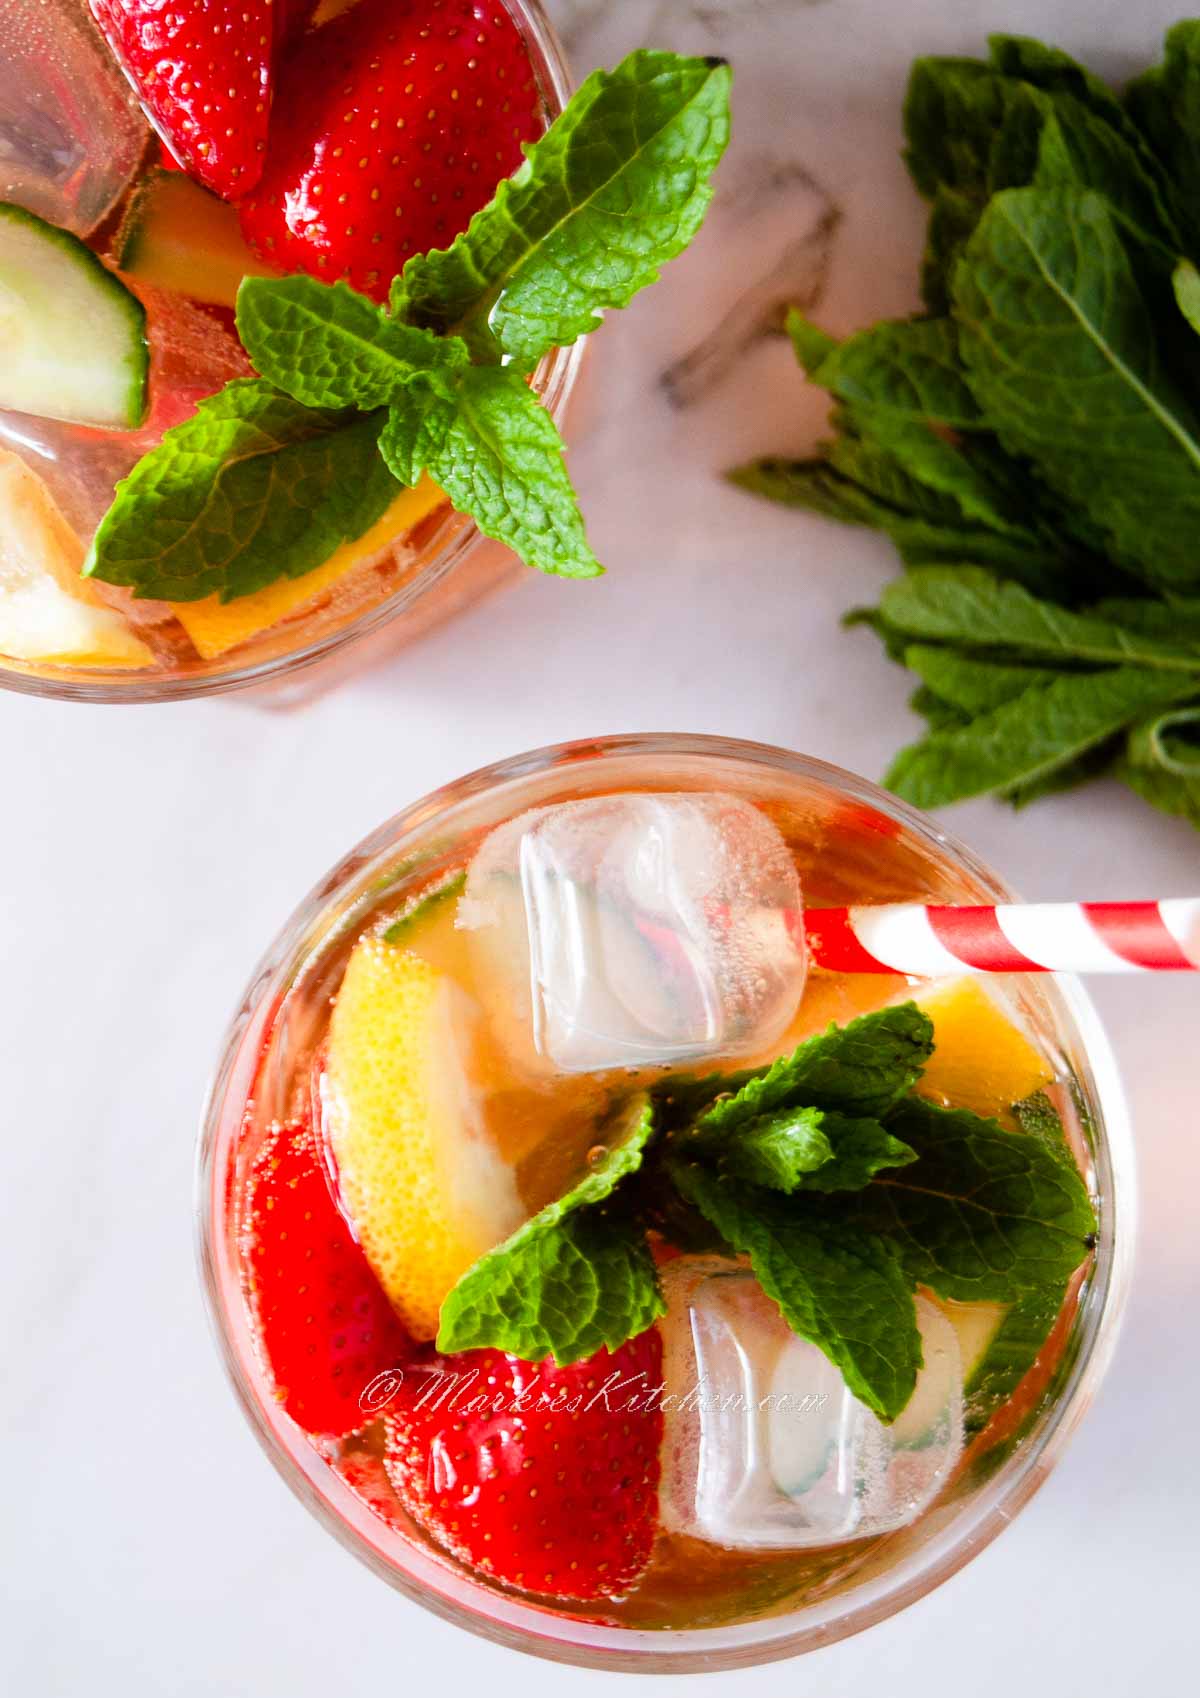 A top down photo of two glasses of non-alcoholic Pimm's, garnished with sliced strawberries, lemons, cucumber, and fresh mint leaves.